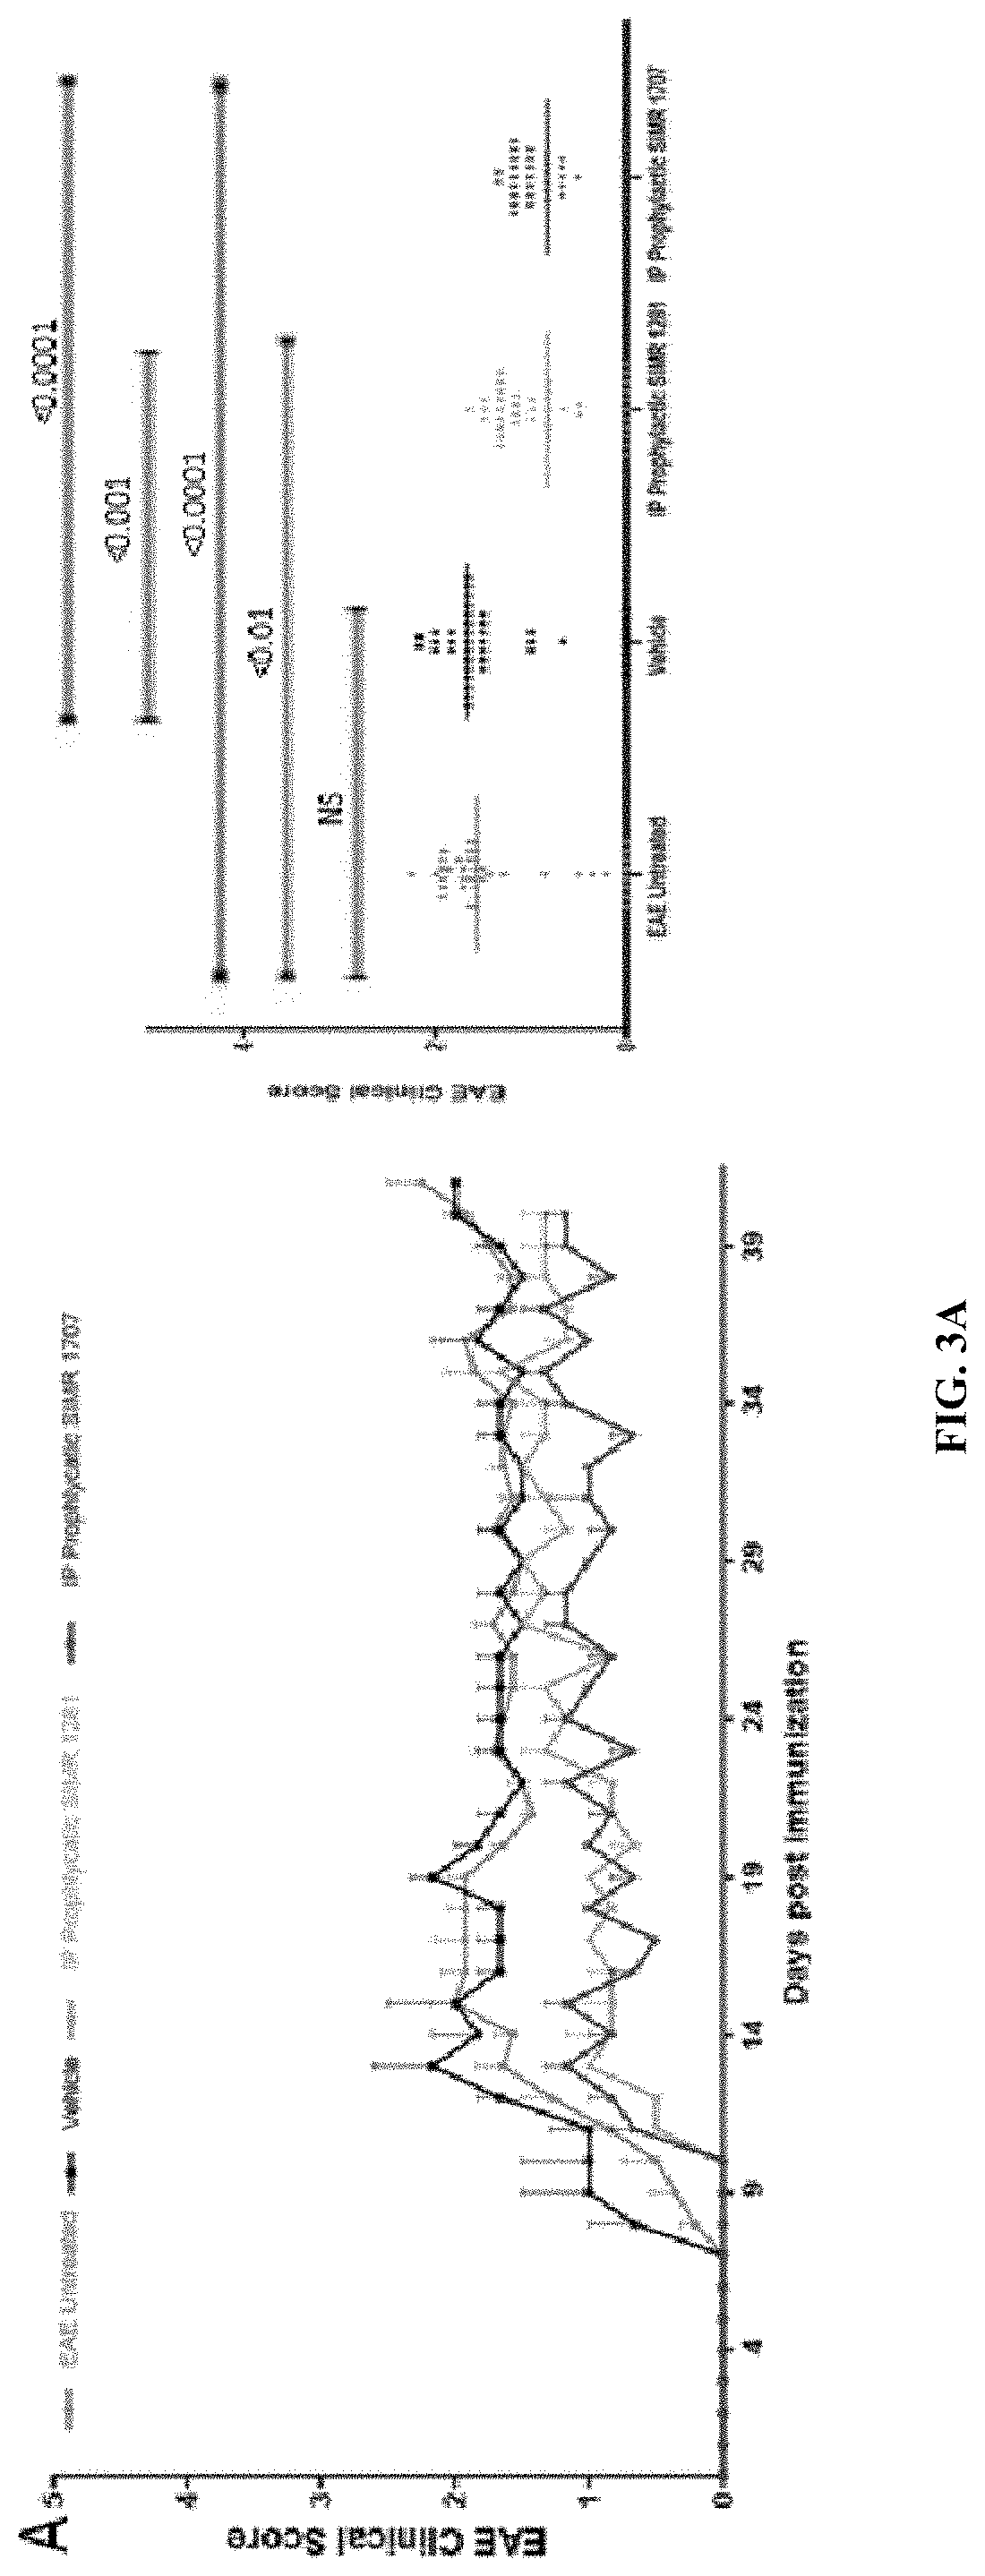 Prevention, Prophylactic and Therapeutic Treatment of Autoimmune Diseases Including Multiple Sclerosis Using Novel Small Molecules and Compositions Thereof